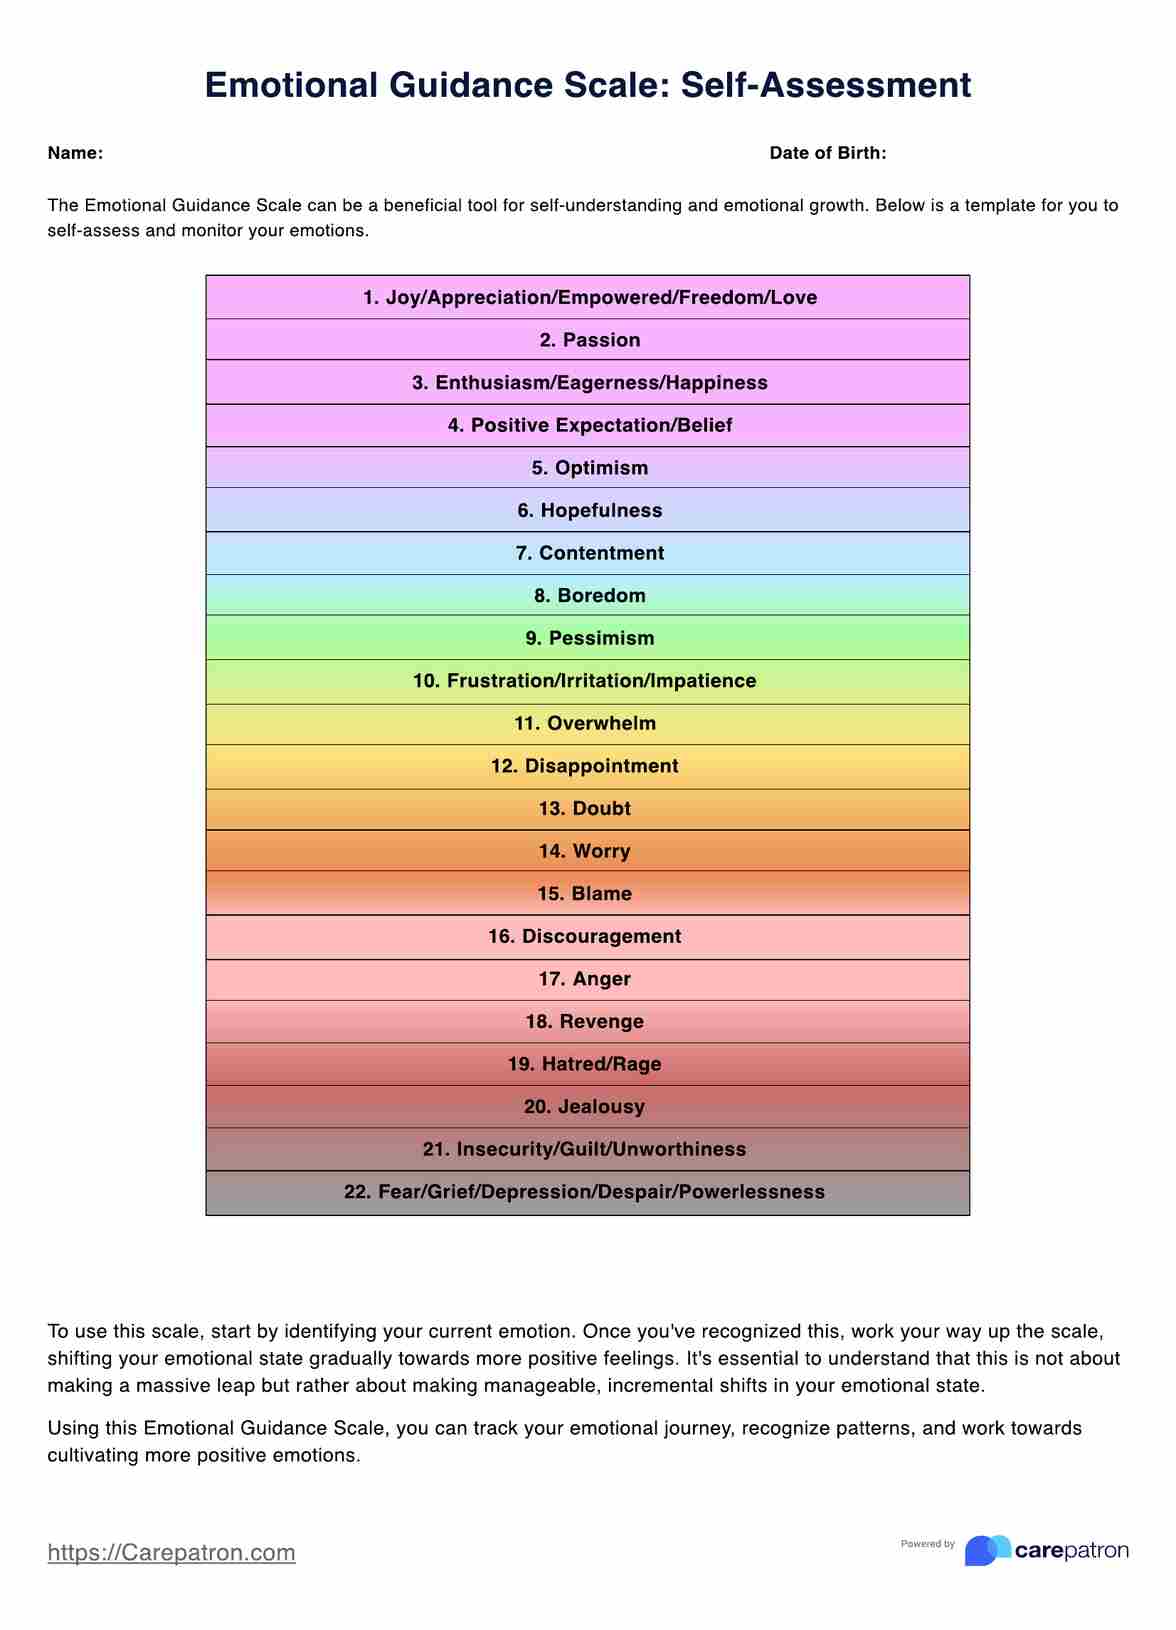 Emotional Guidance Scale PDF Example